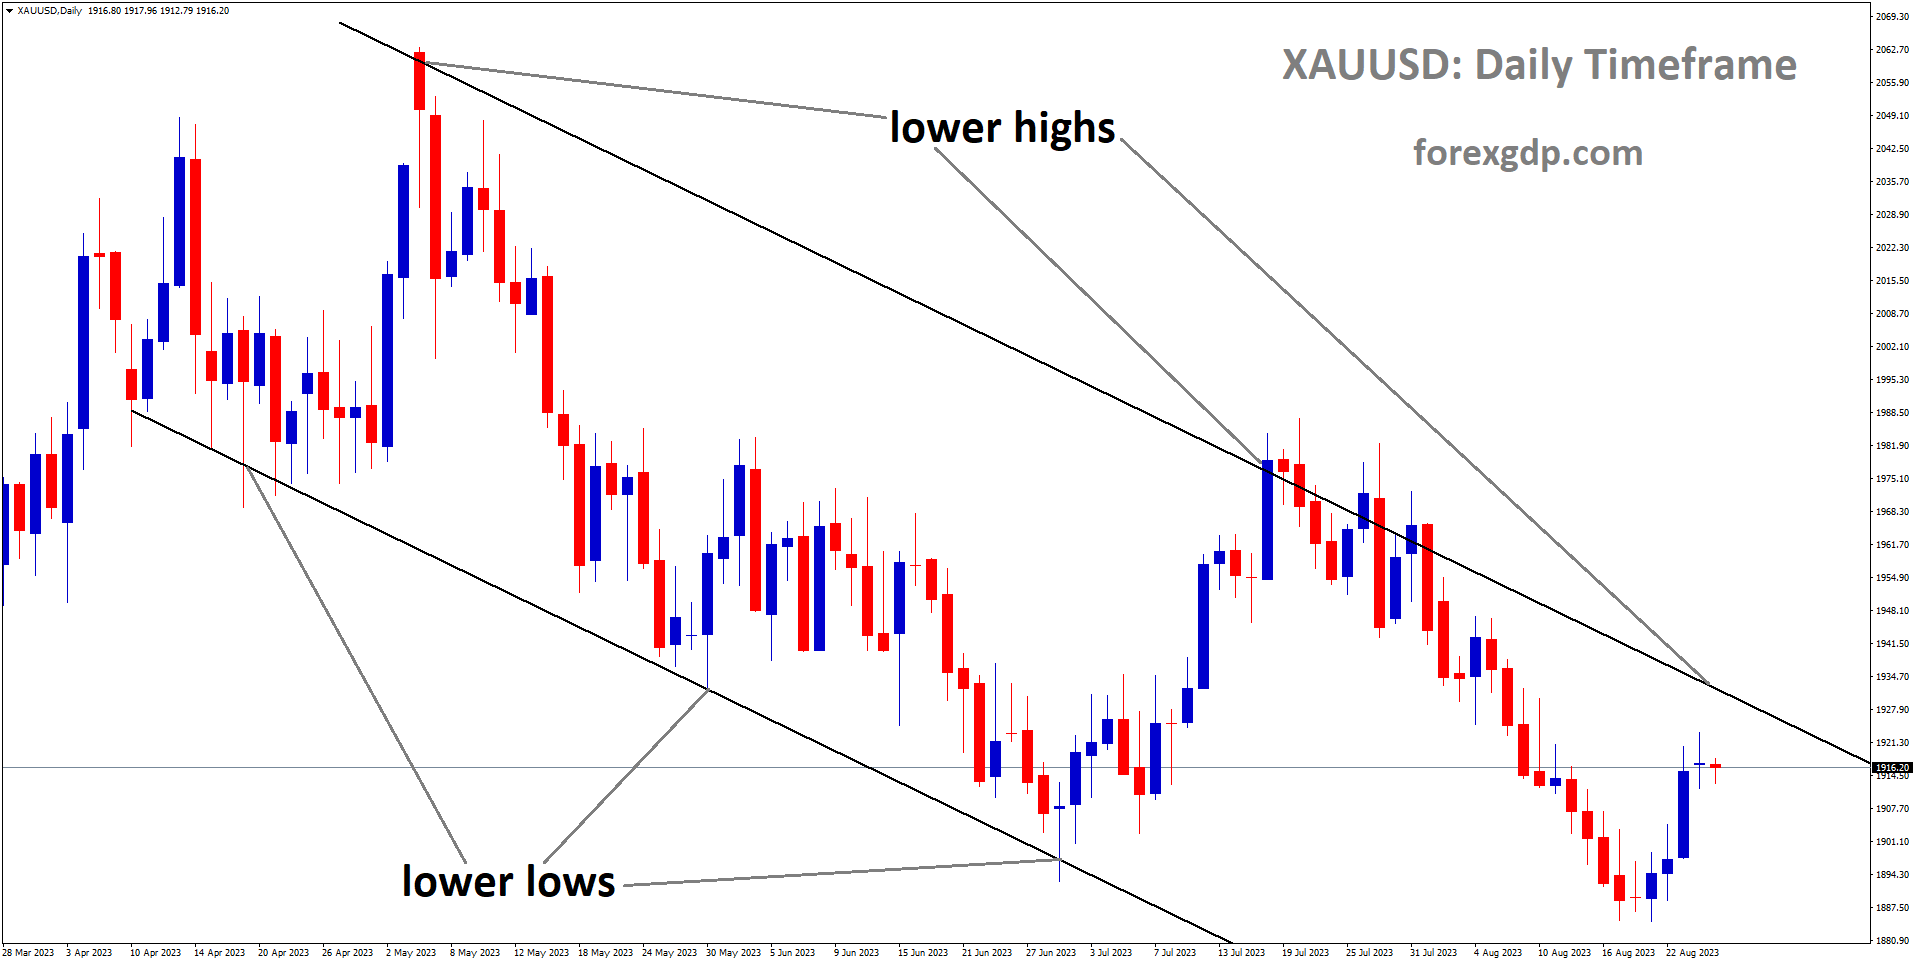 XAUUSD is moving in Descending channel and market has reached the lower high area of the channel